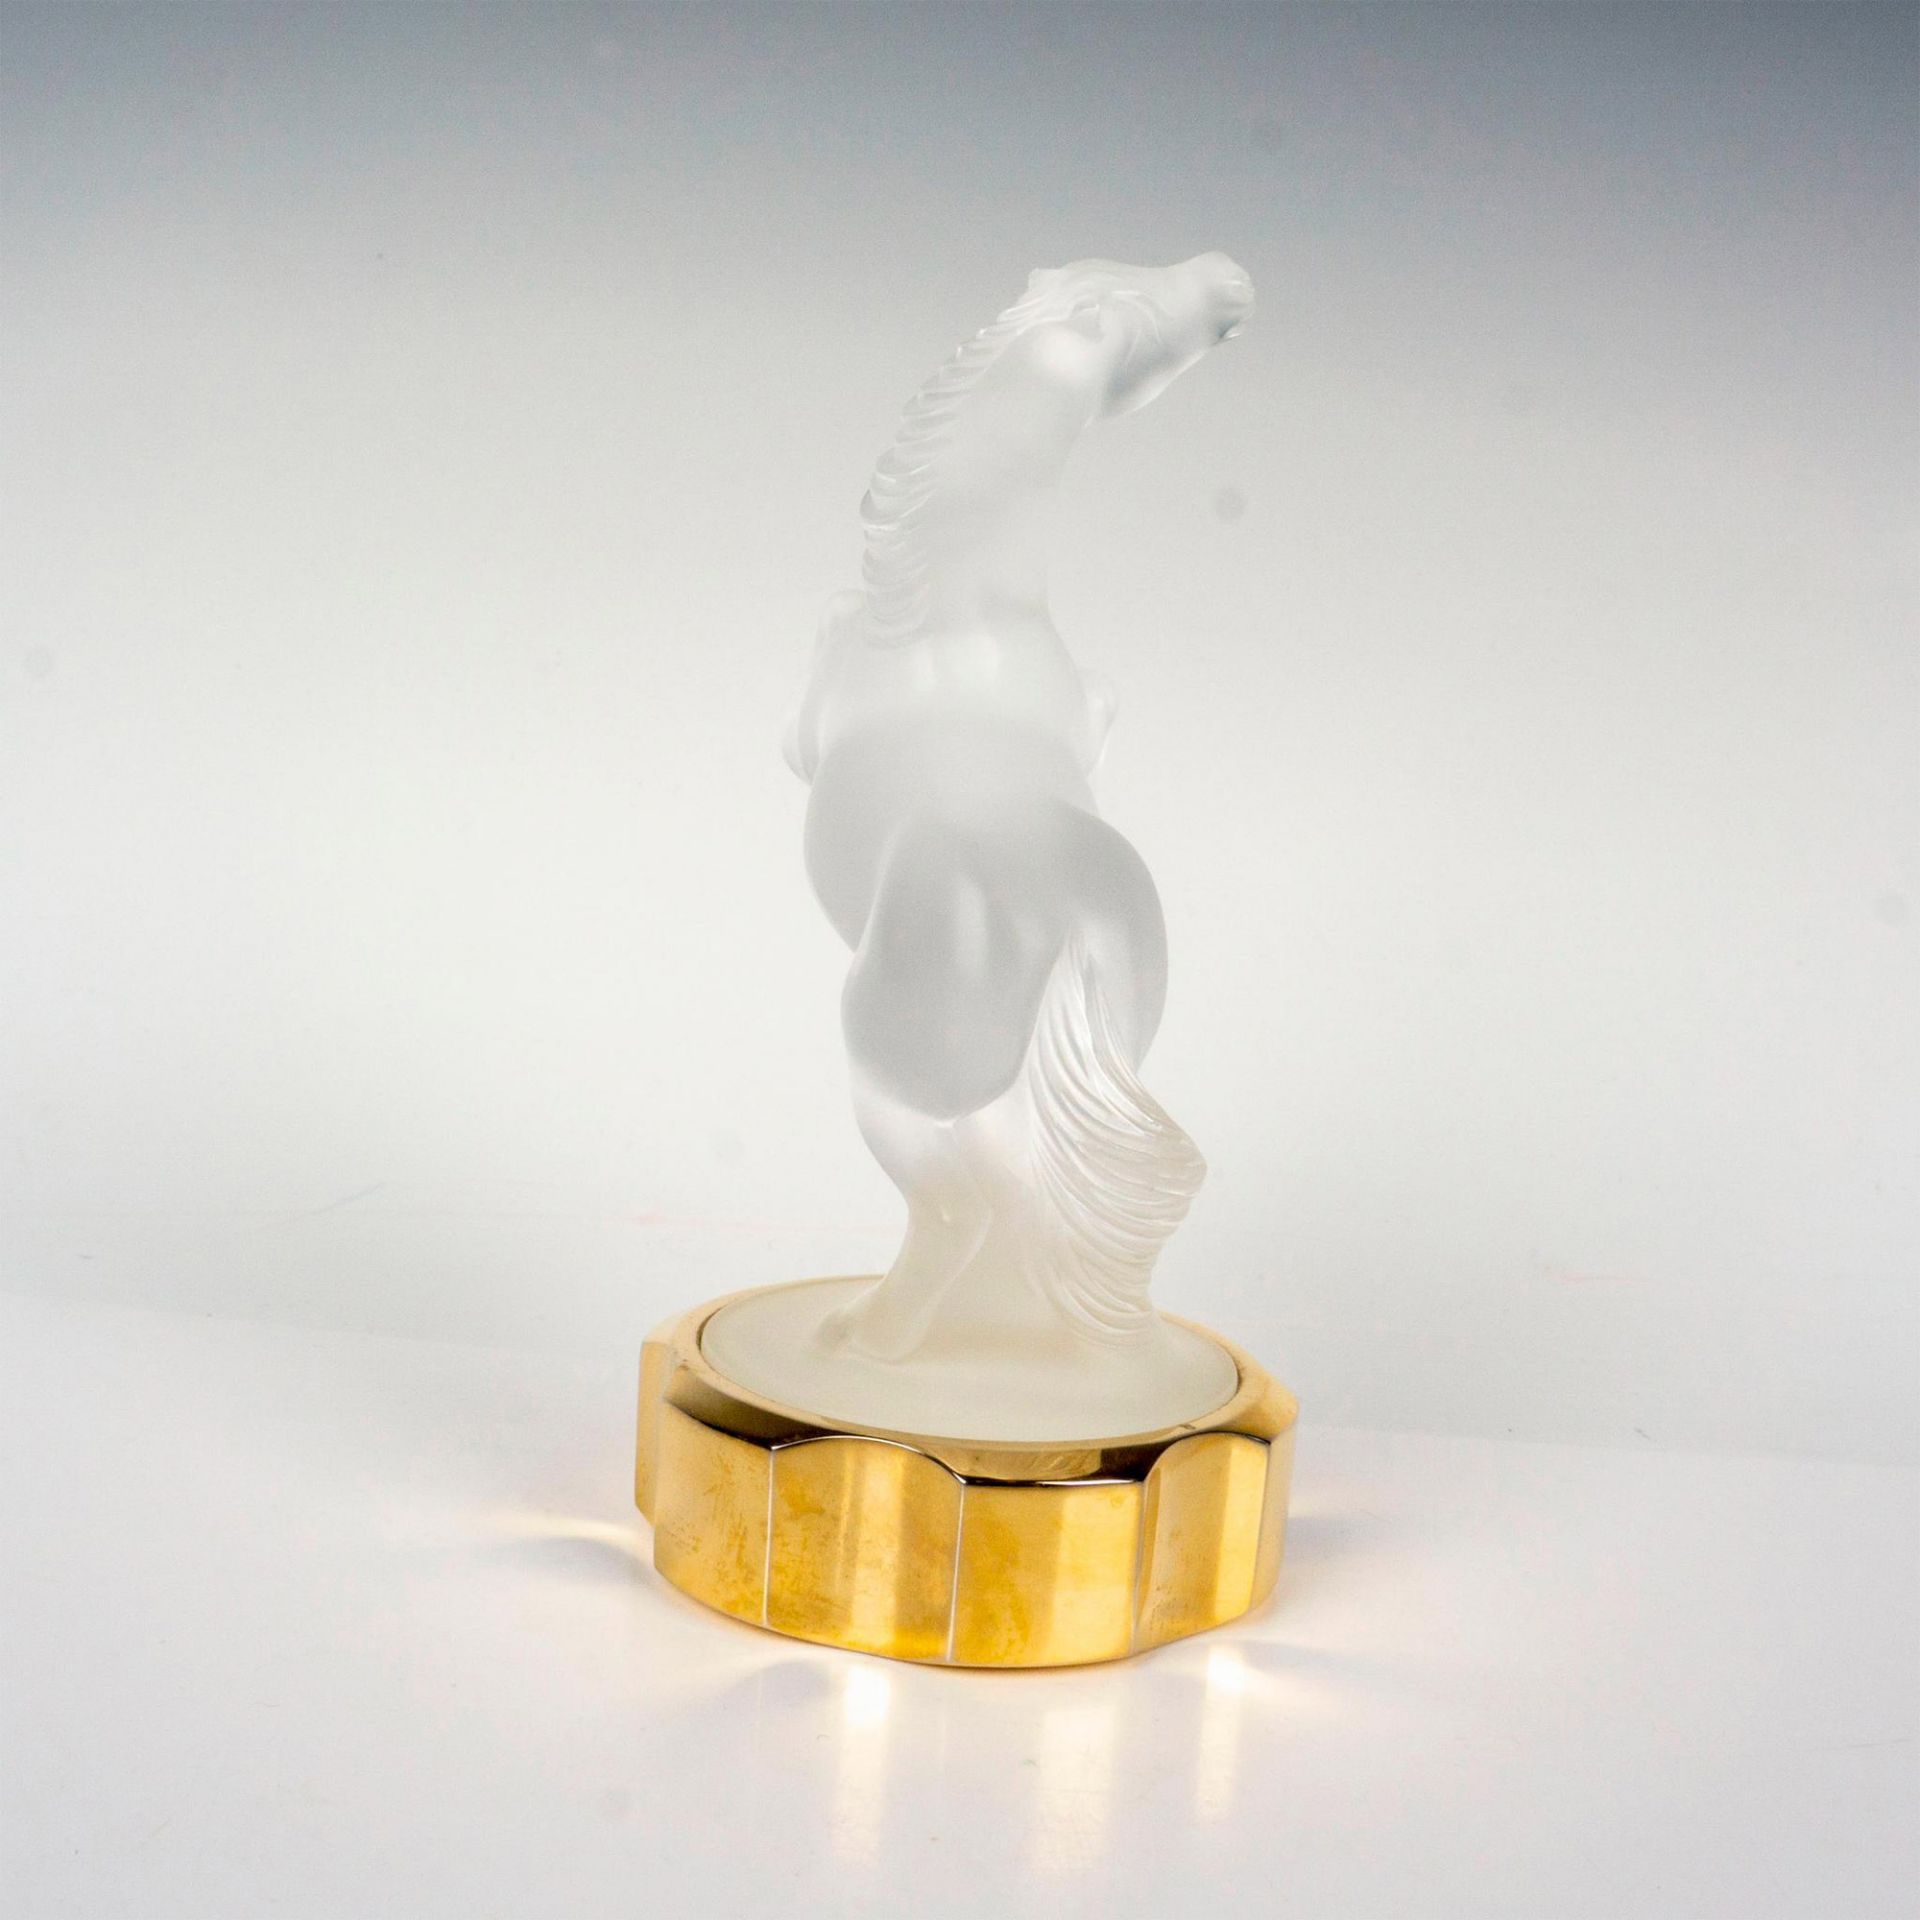 Lalique Crystal Perfume Bottle Flacon Collection, Equus - Image 2 of 3